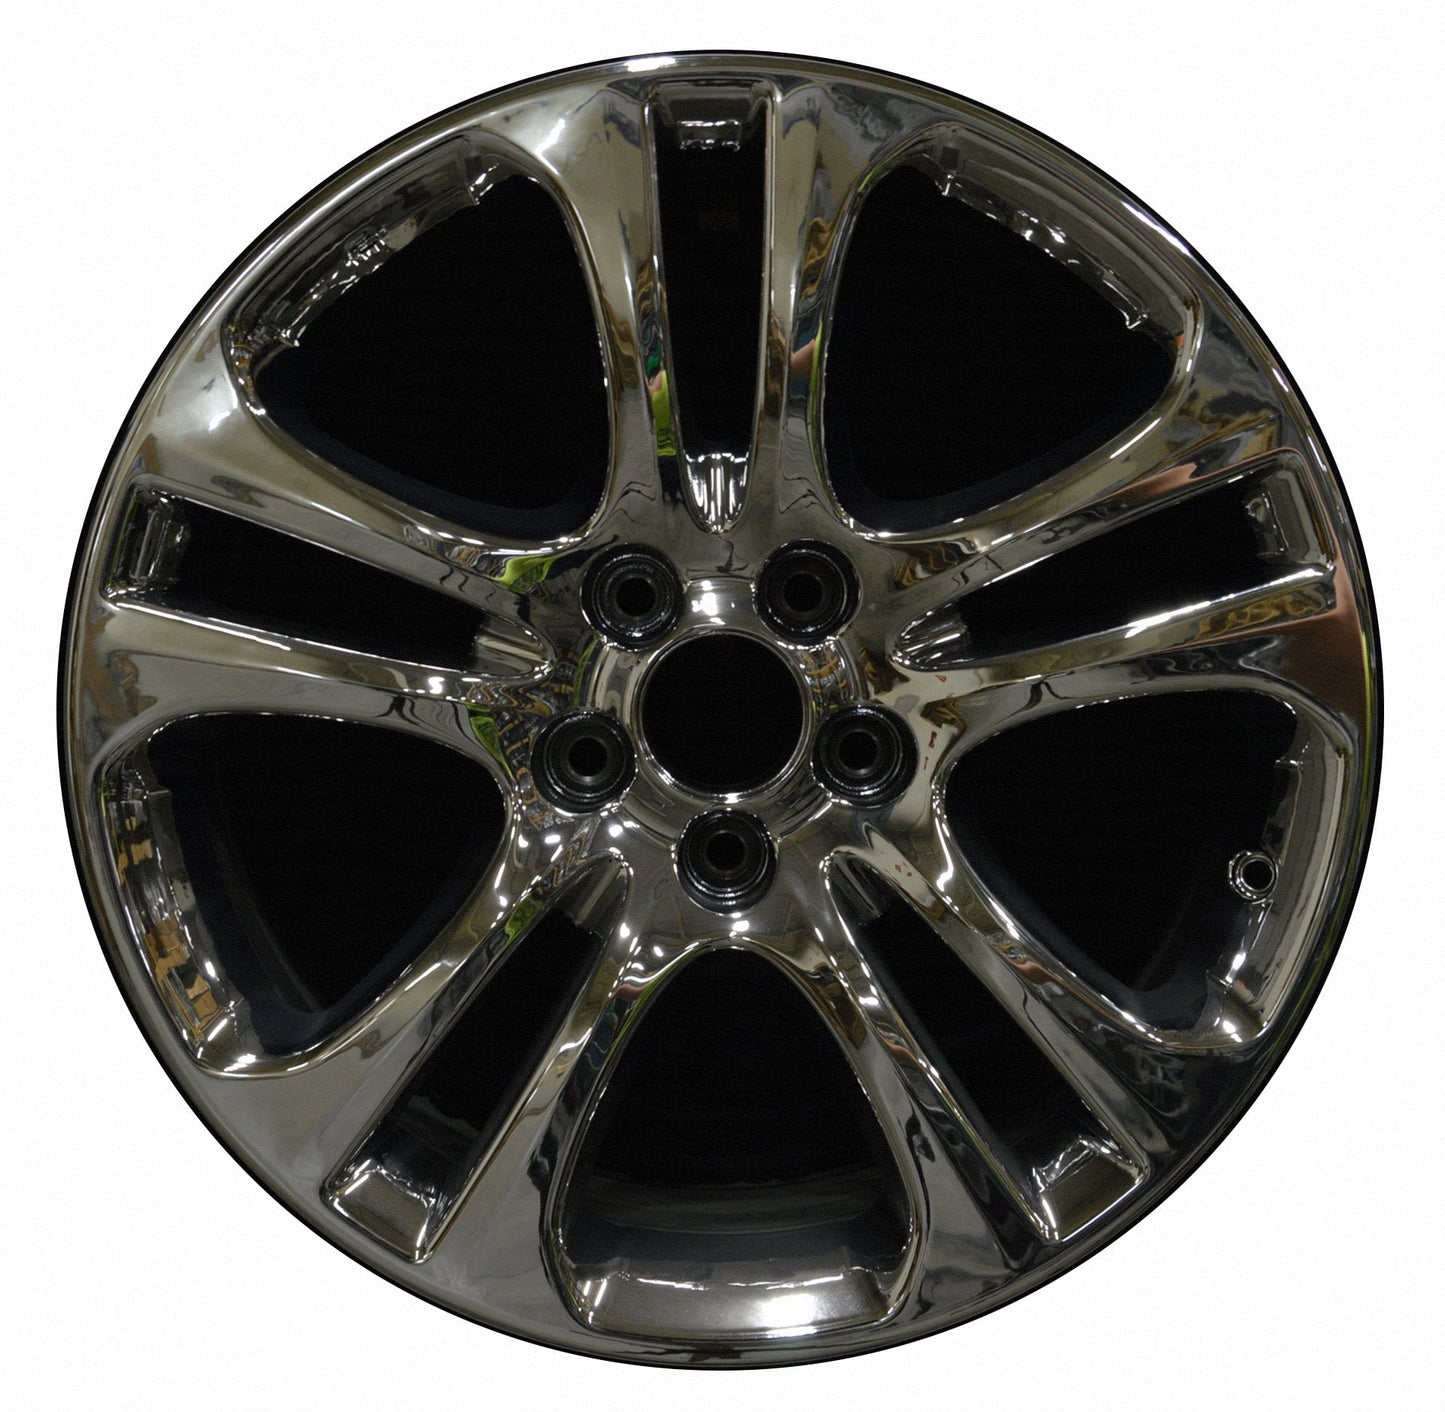 Acura MDX  2007, 2008, 2009, 2010, 2011, 2012, 2013 Factory OEM Car Wheel Size 19x8.5 Alloy WAO.71761.PVD1.FF